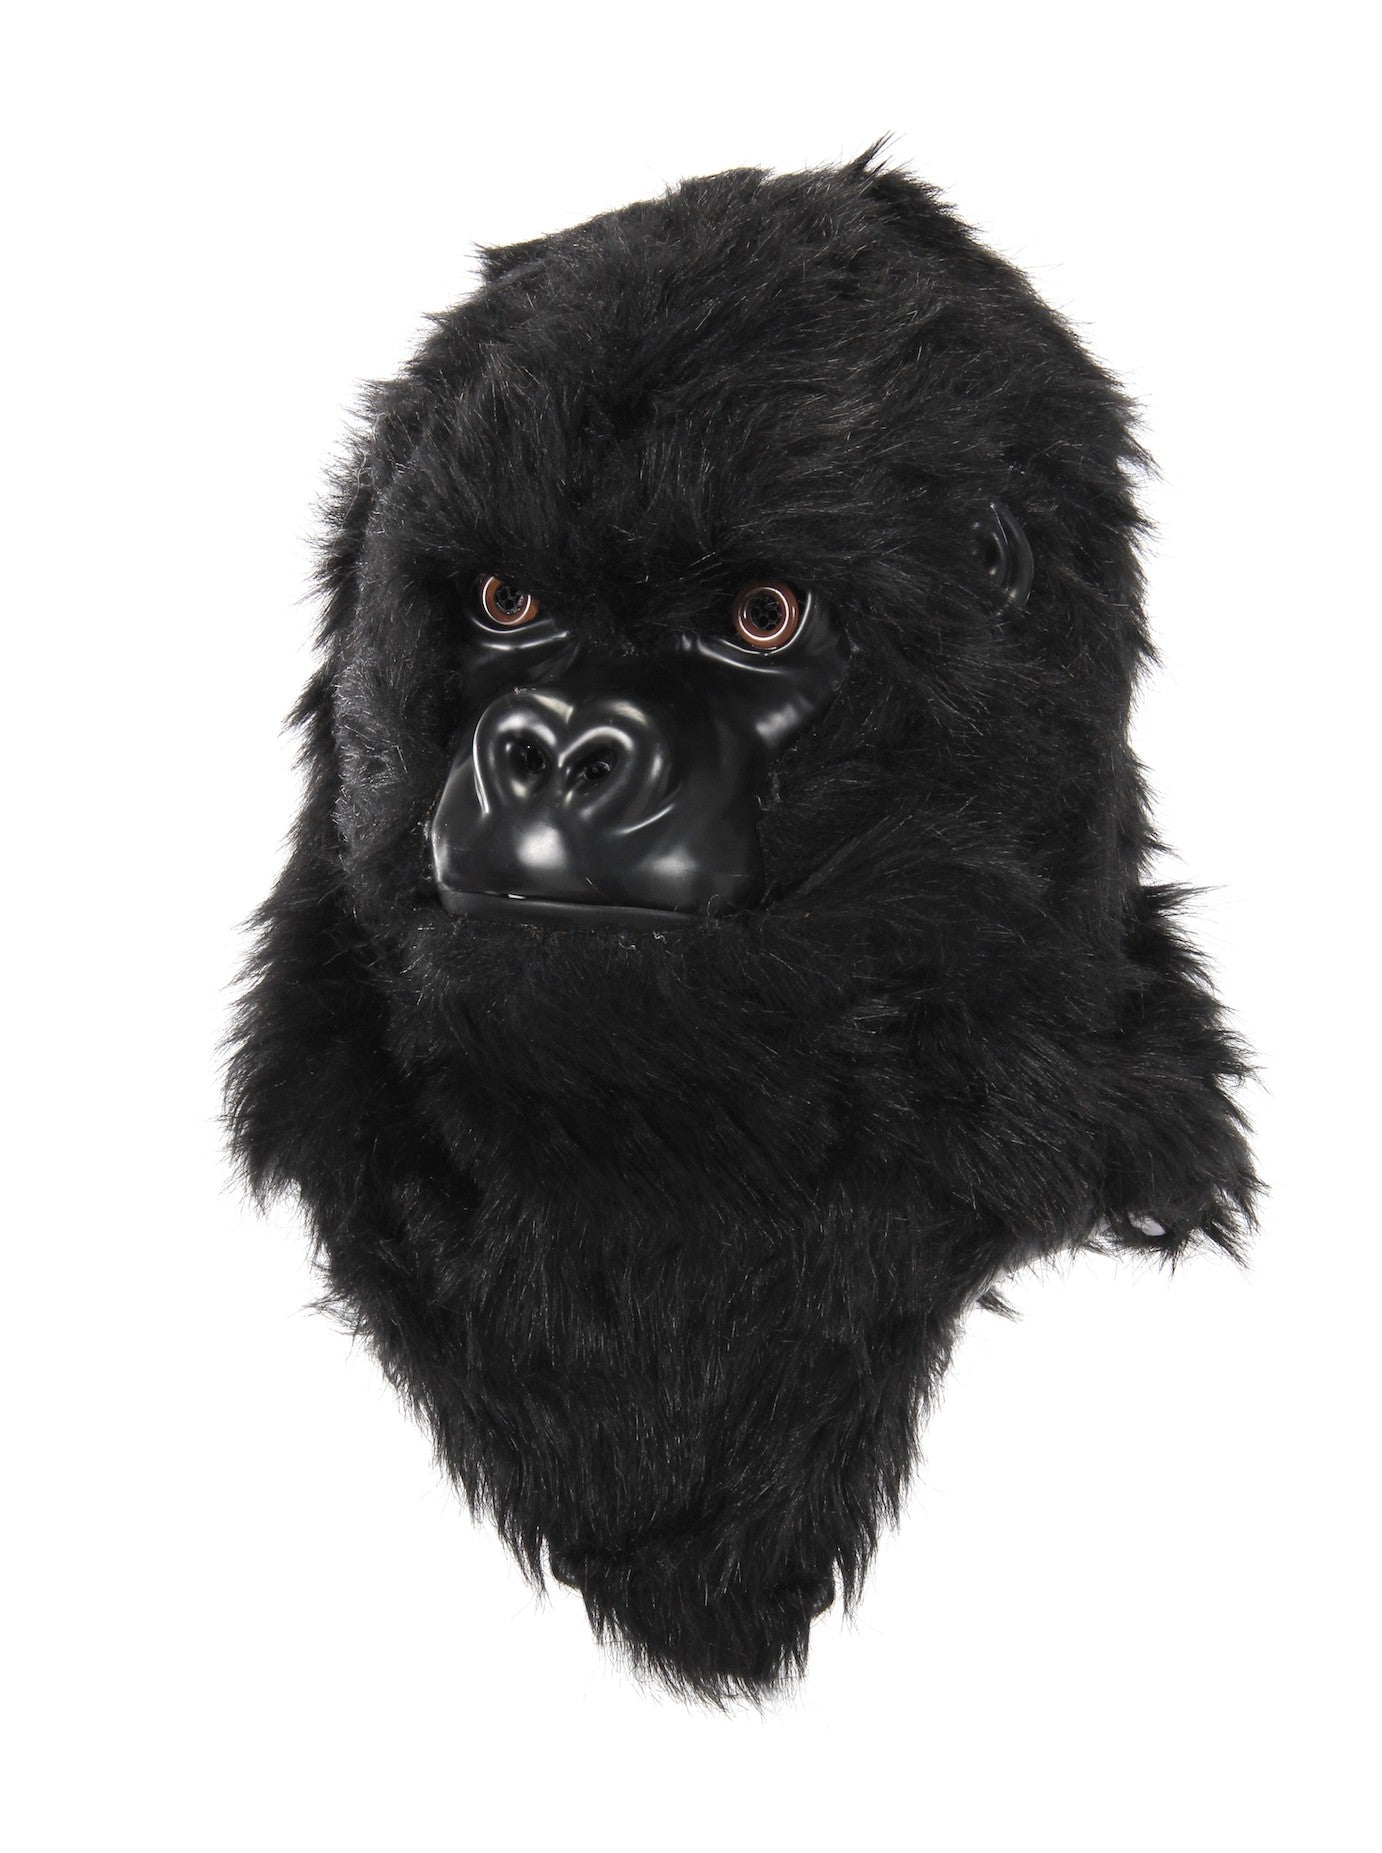 Gorilla Mouth Mover Mask by Elope